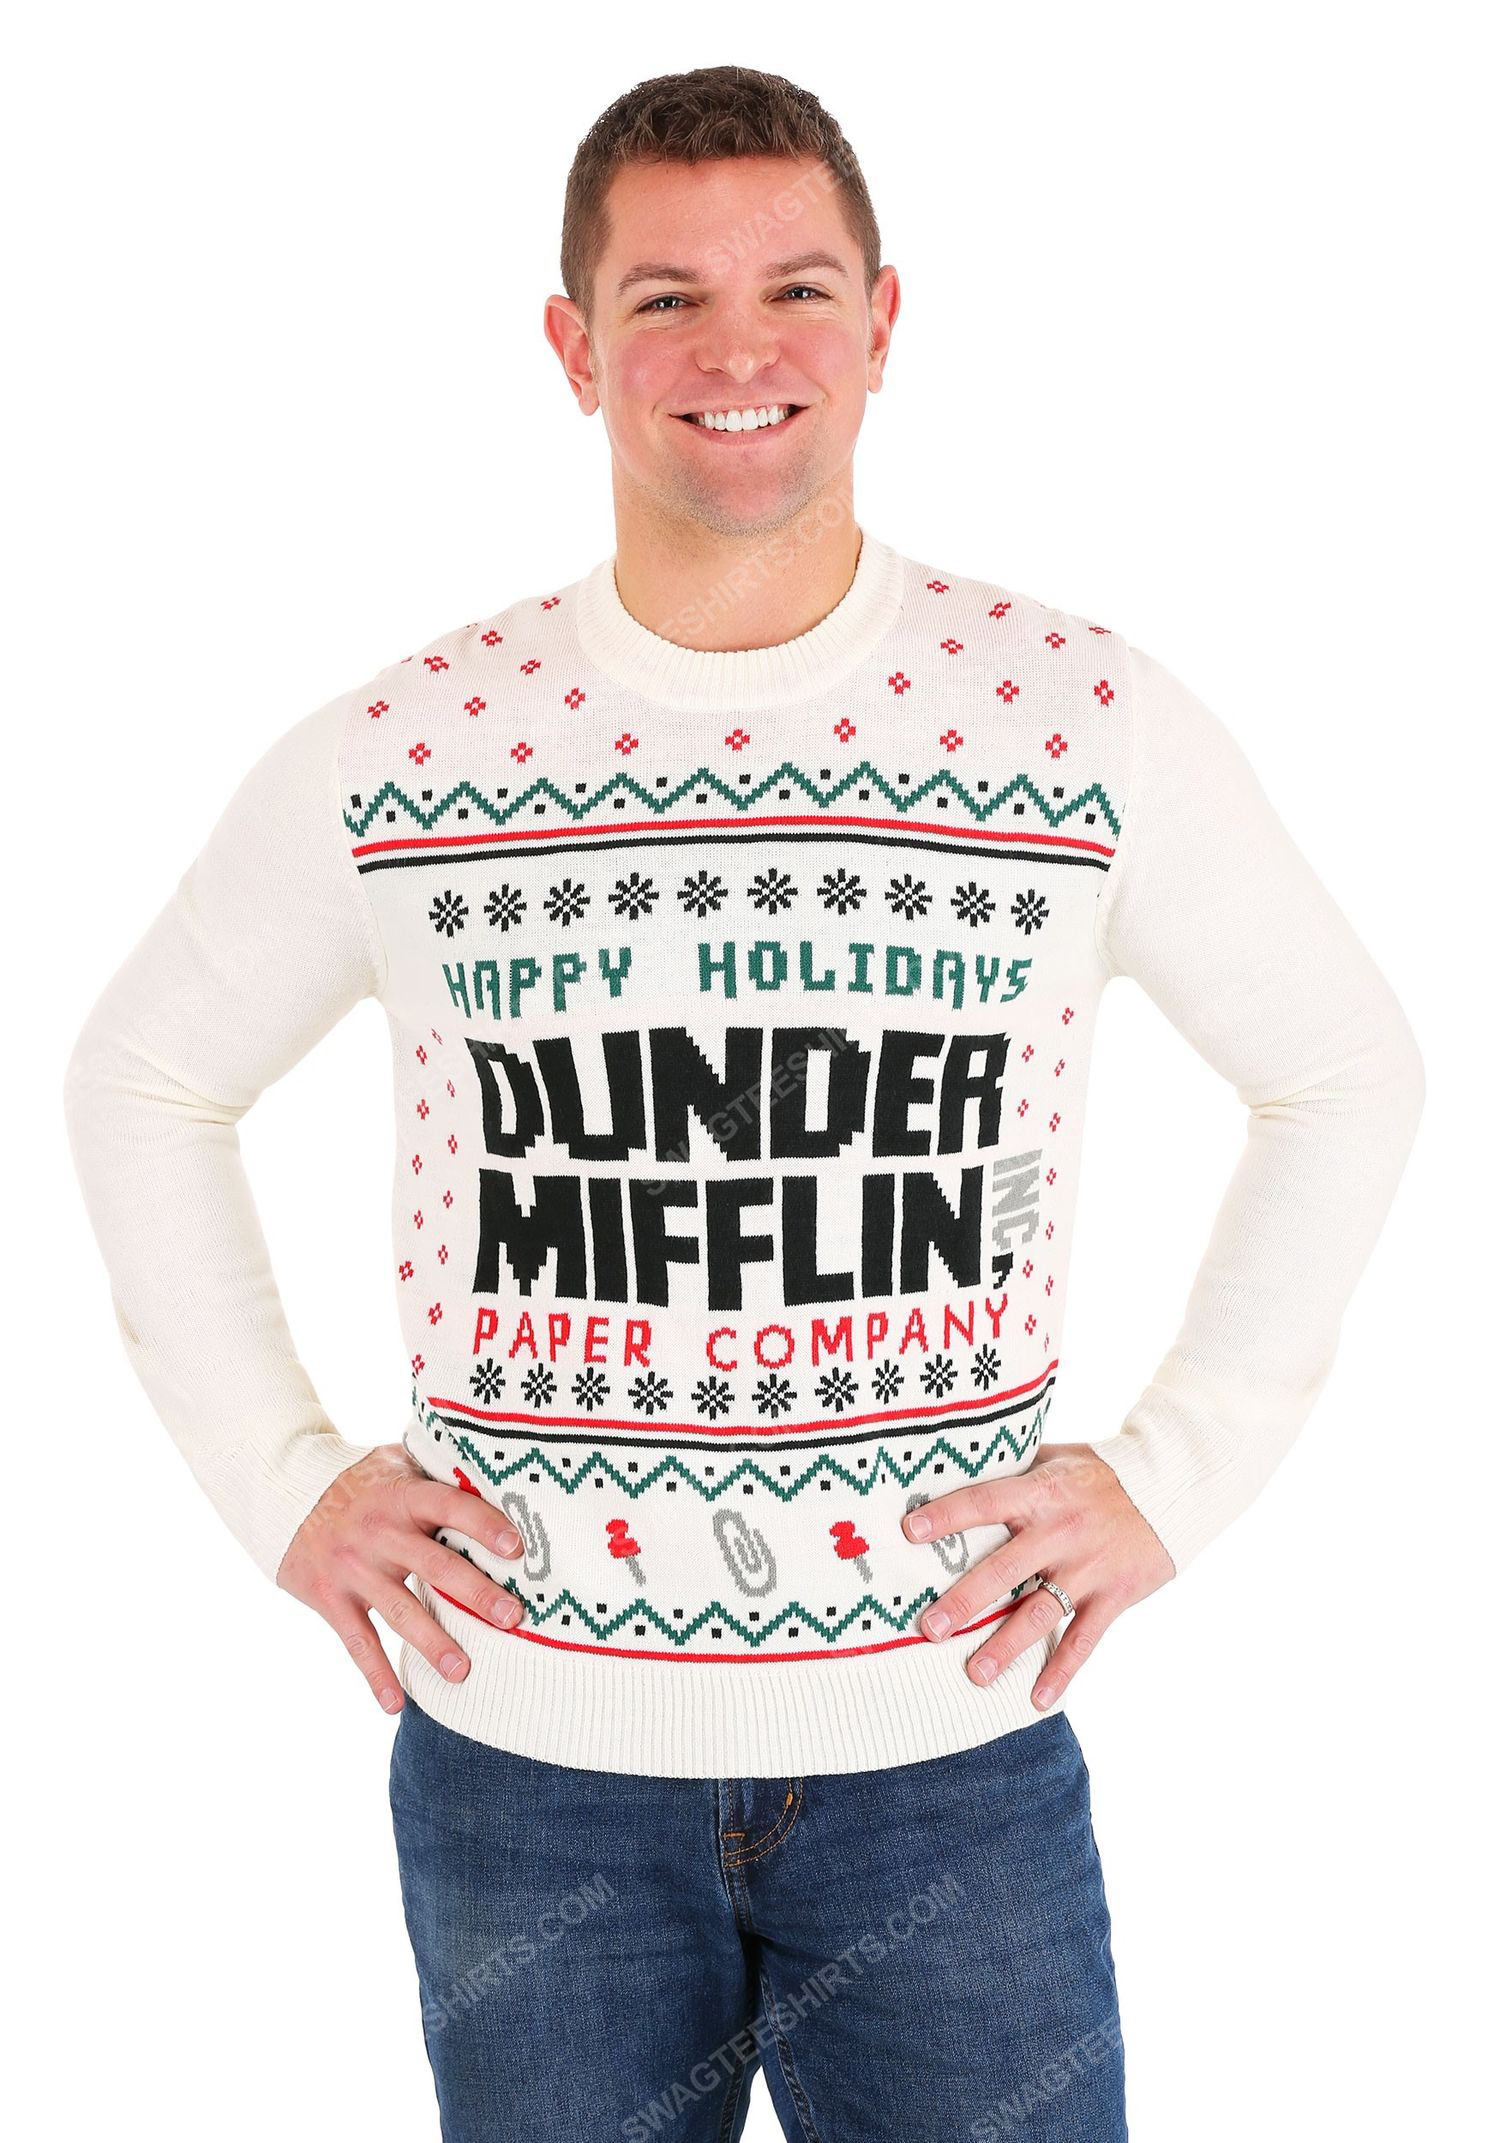 The office happy dunder mifflin paper company full print ugly christmas sweater 2 - Copy (2)